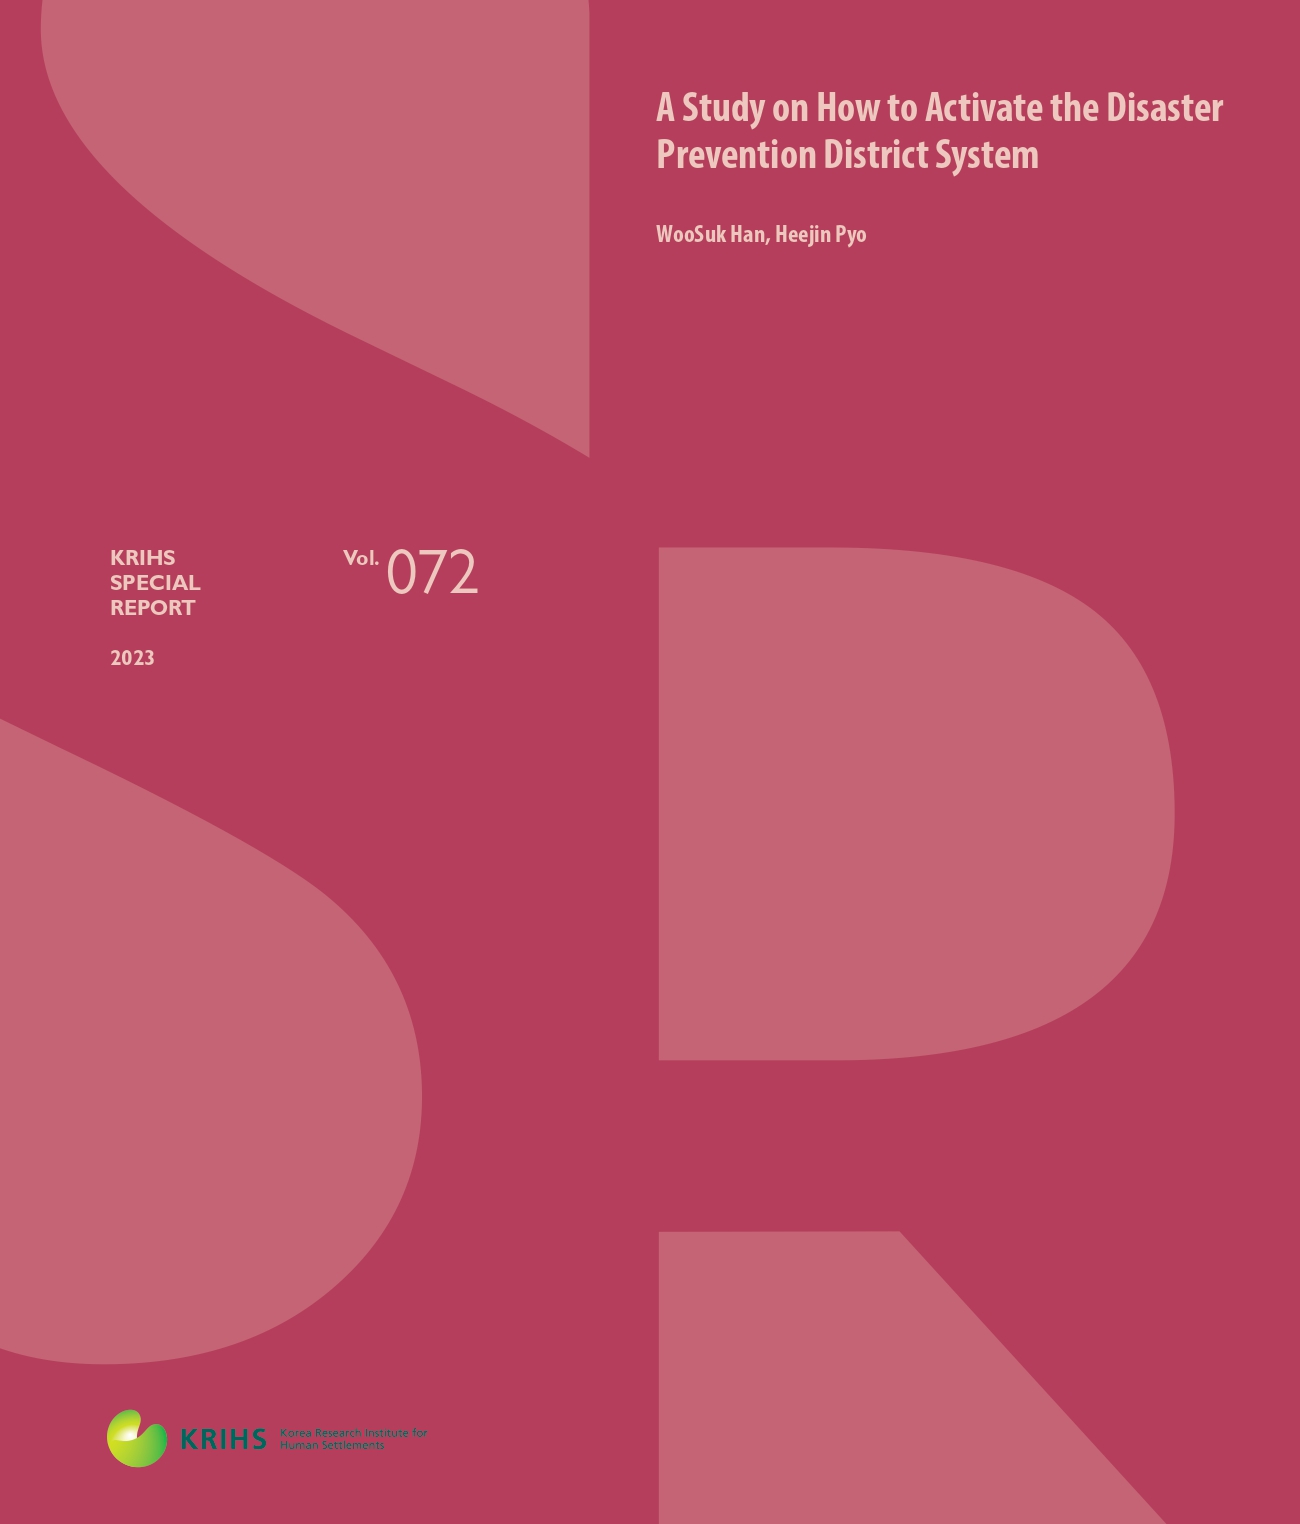 Special Report Vol. 72 (2023)

A Study on How to Activate the Disaster Prevention District System